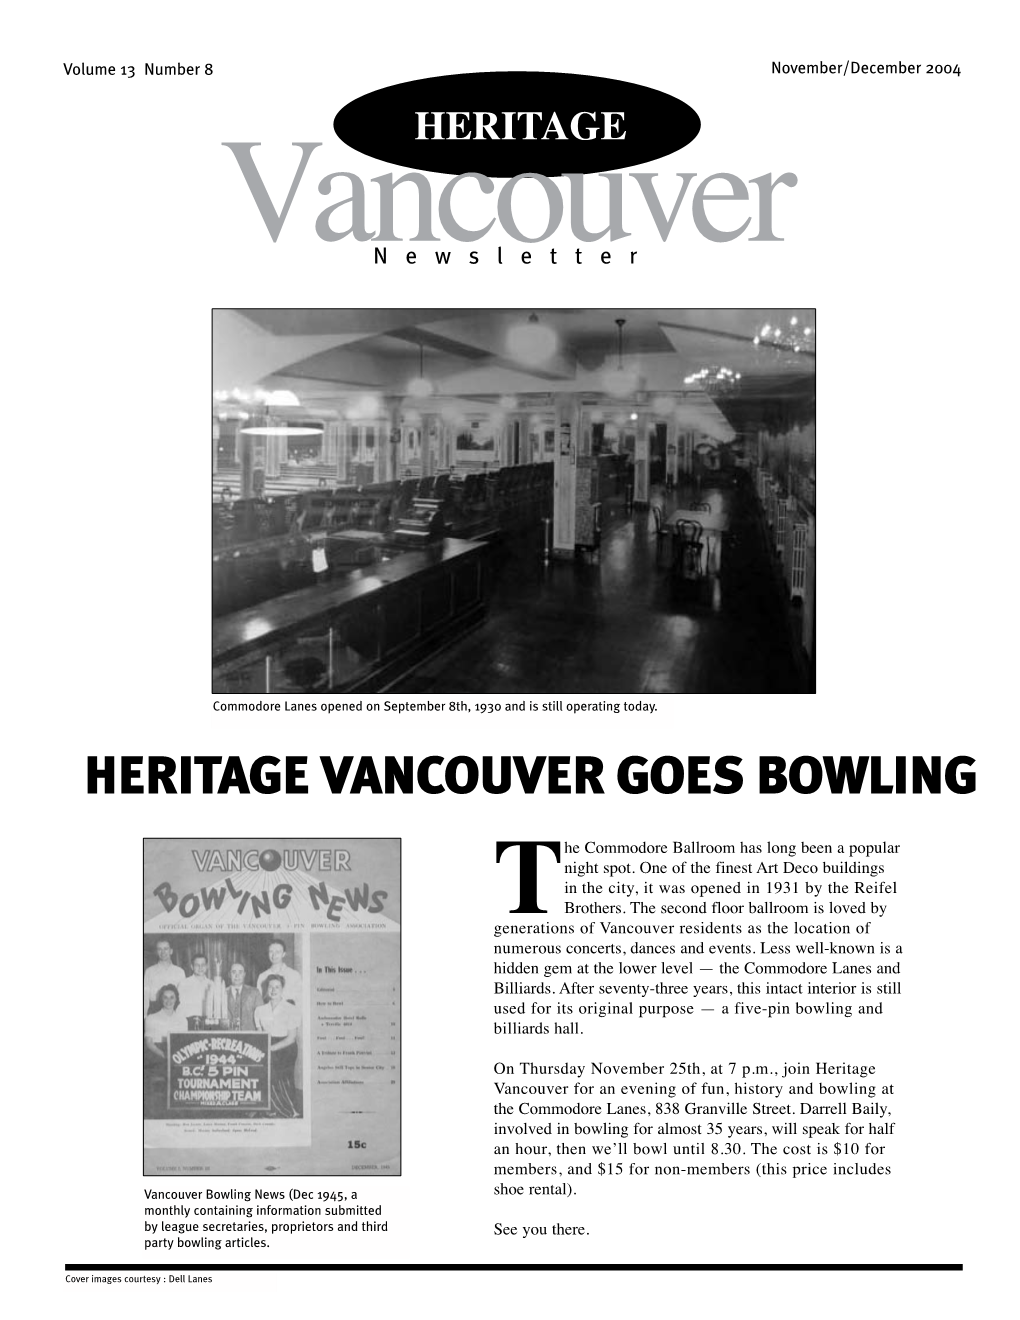 Heritage Vancouver Goes Bowling